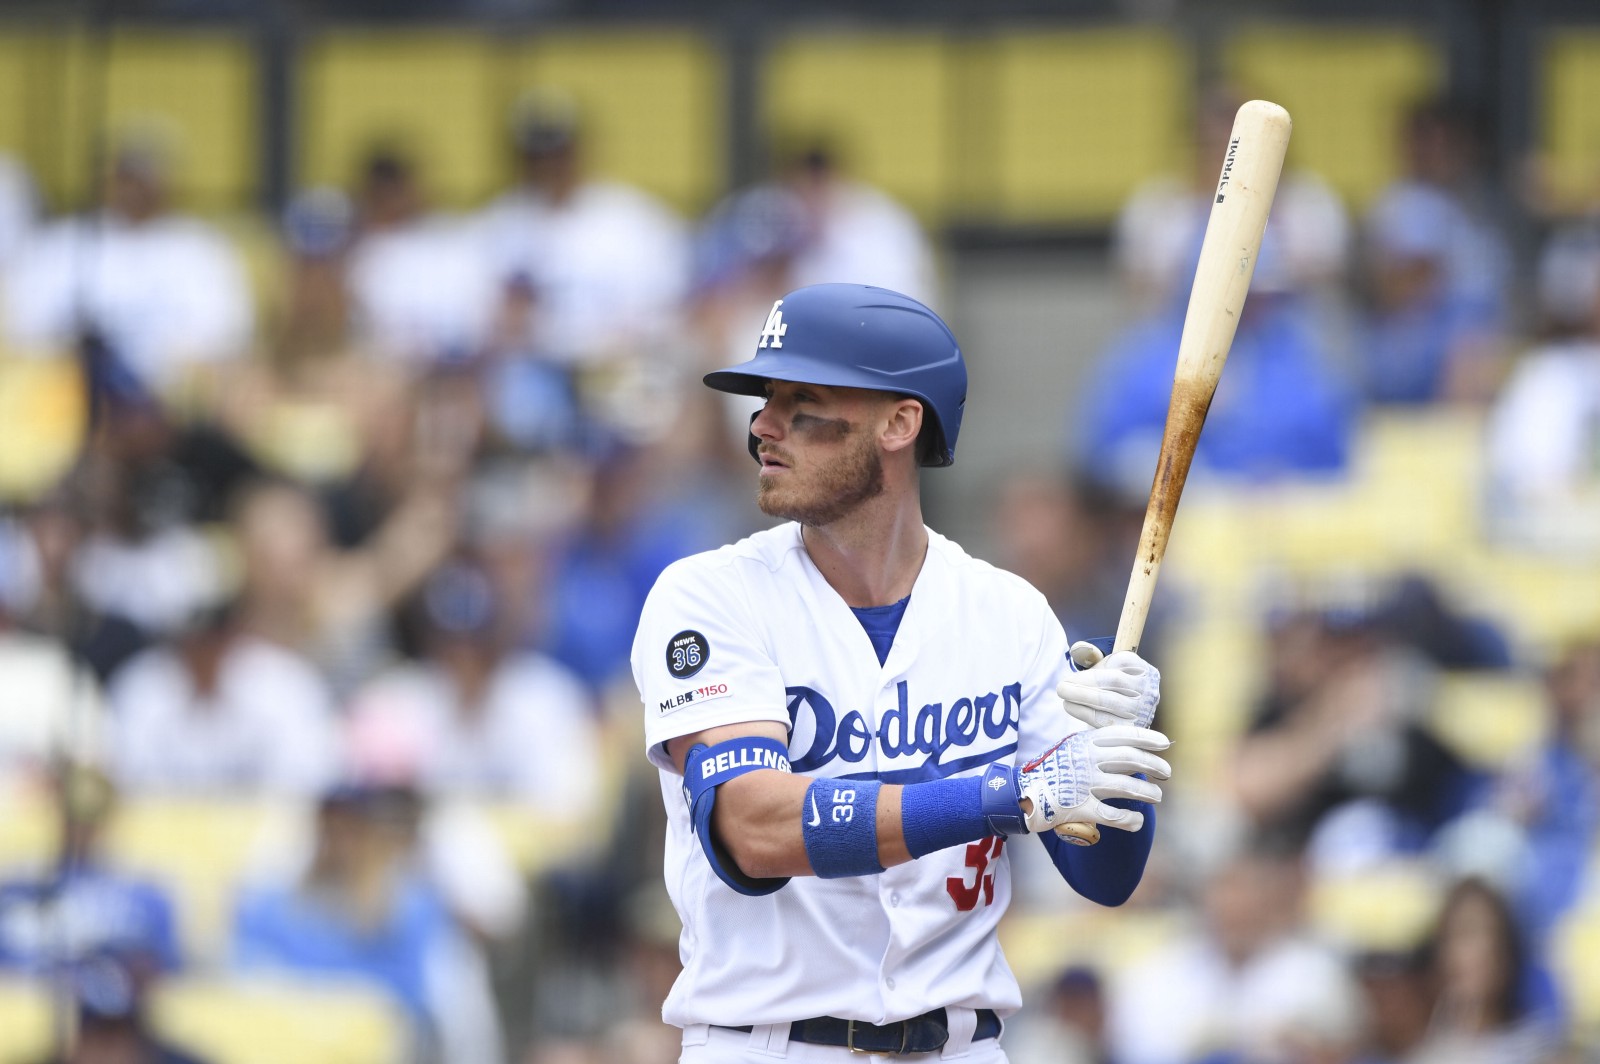 How is Cody Bellinger still batting .400 this late in the season? 